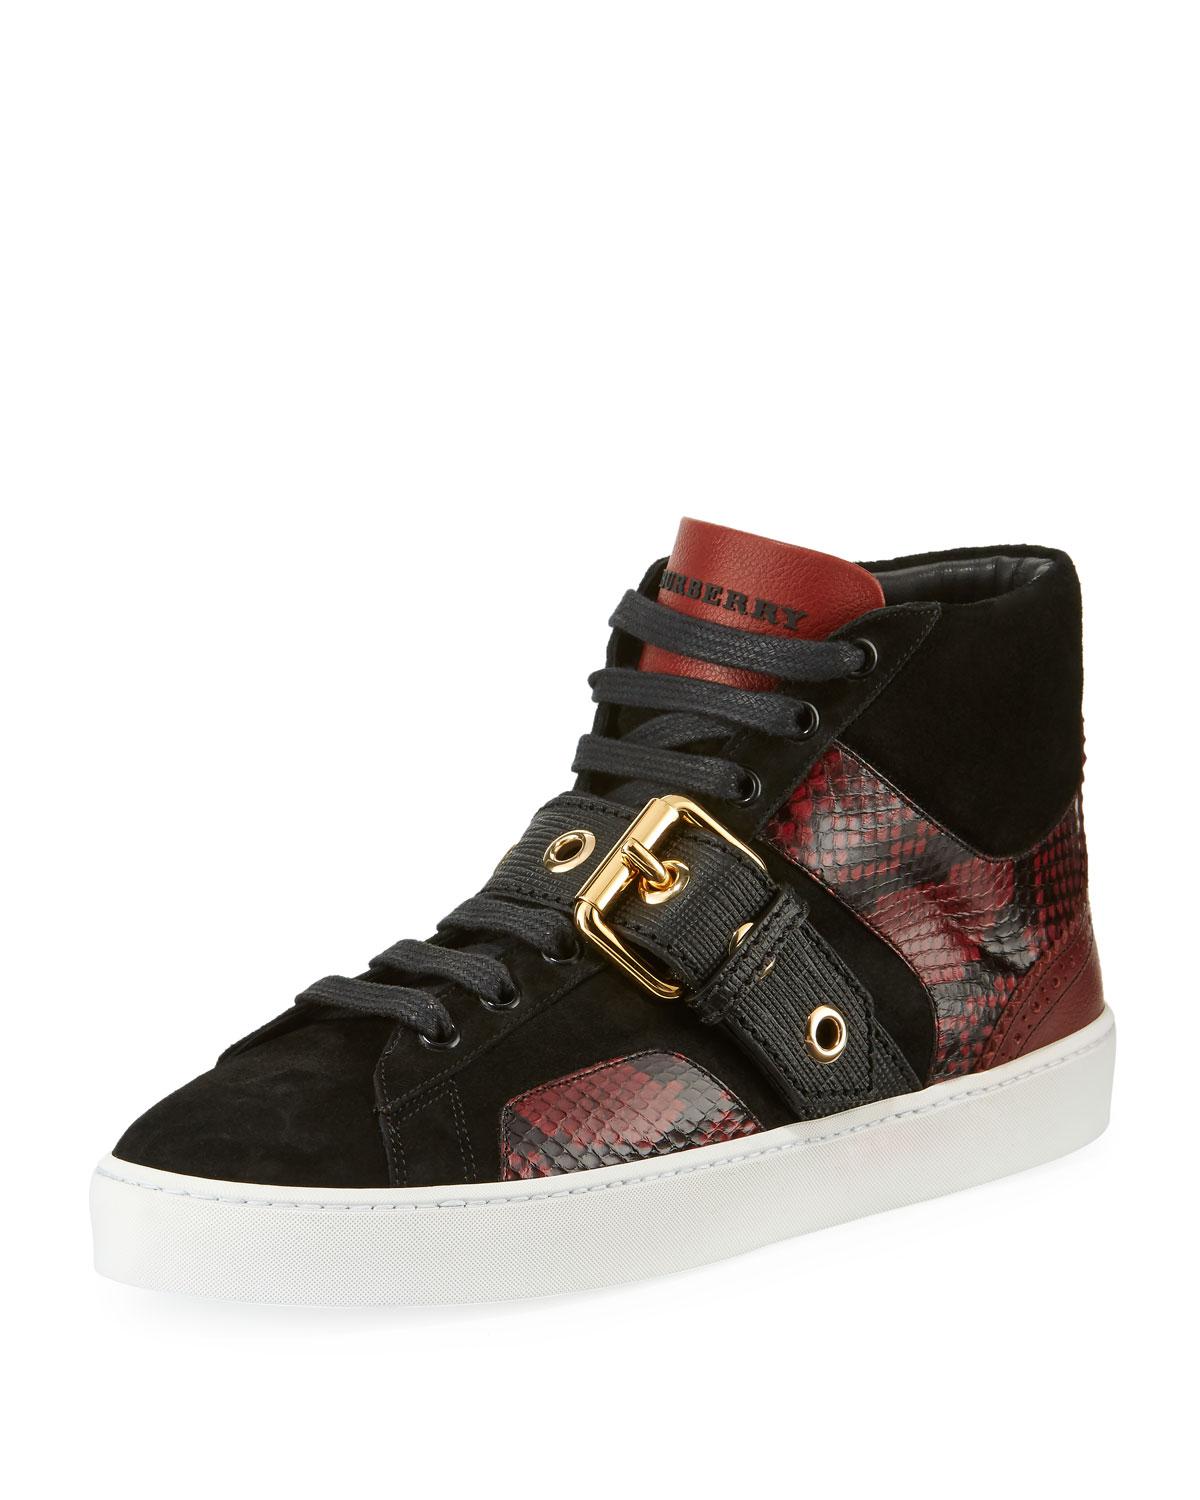 Burberry Suede/snake-print High-top Sneakers for Men - Lyst